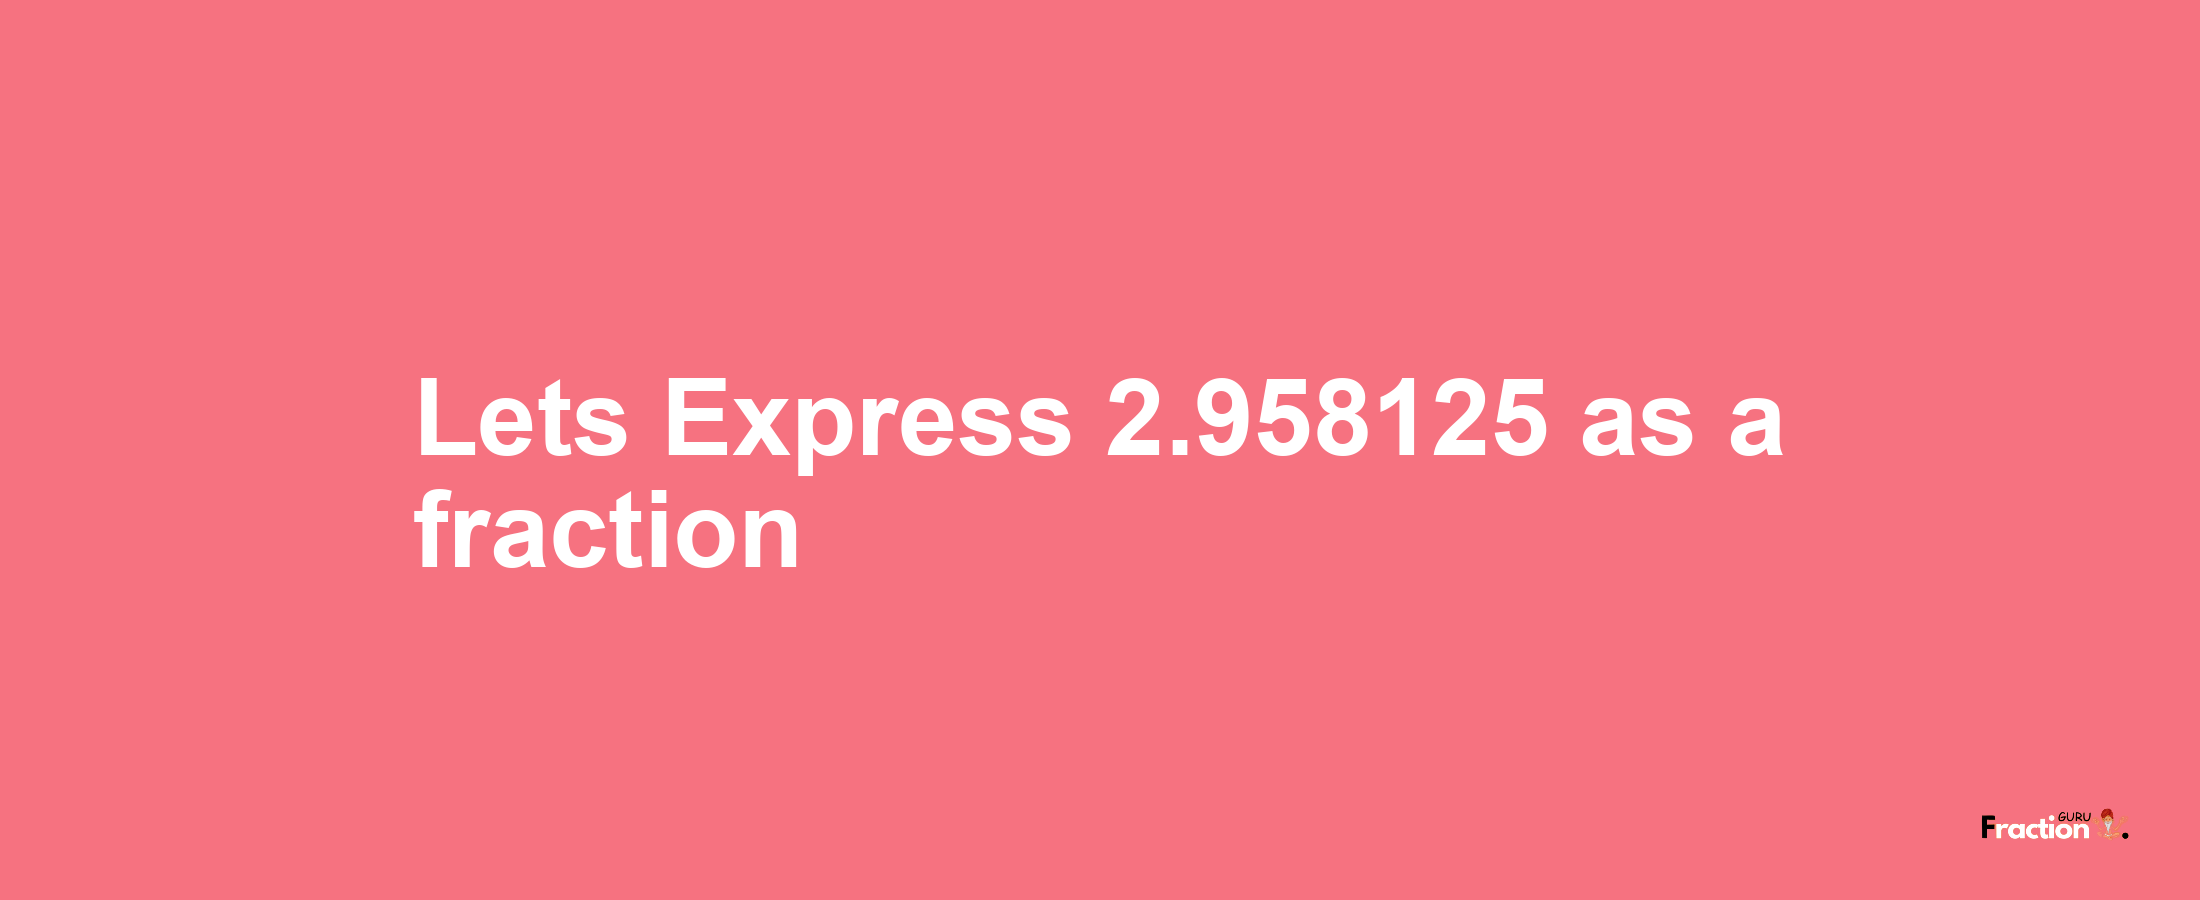 Lets Express 2.958125 as afraction